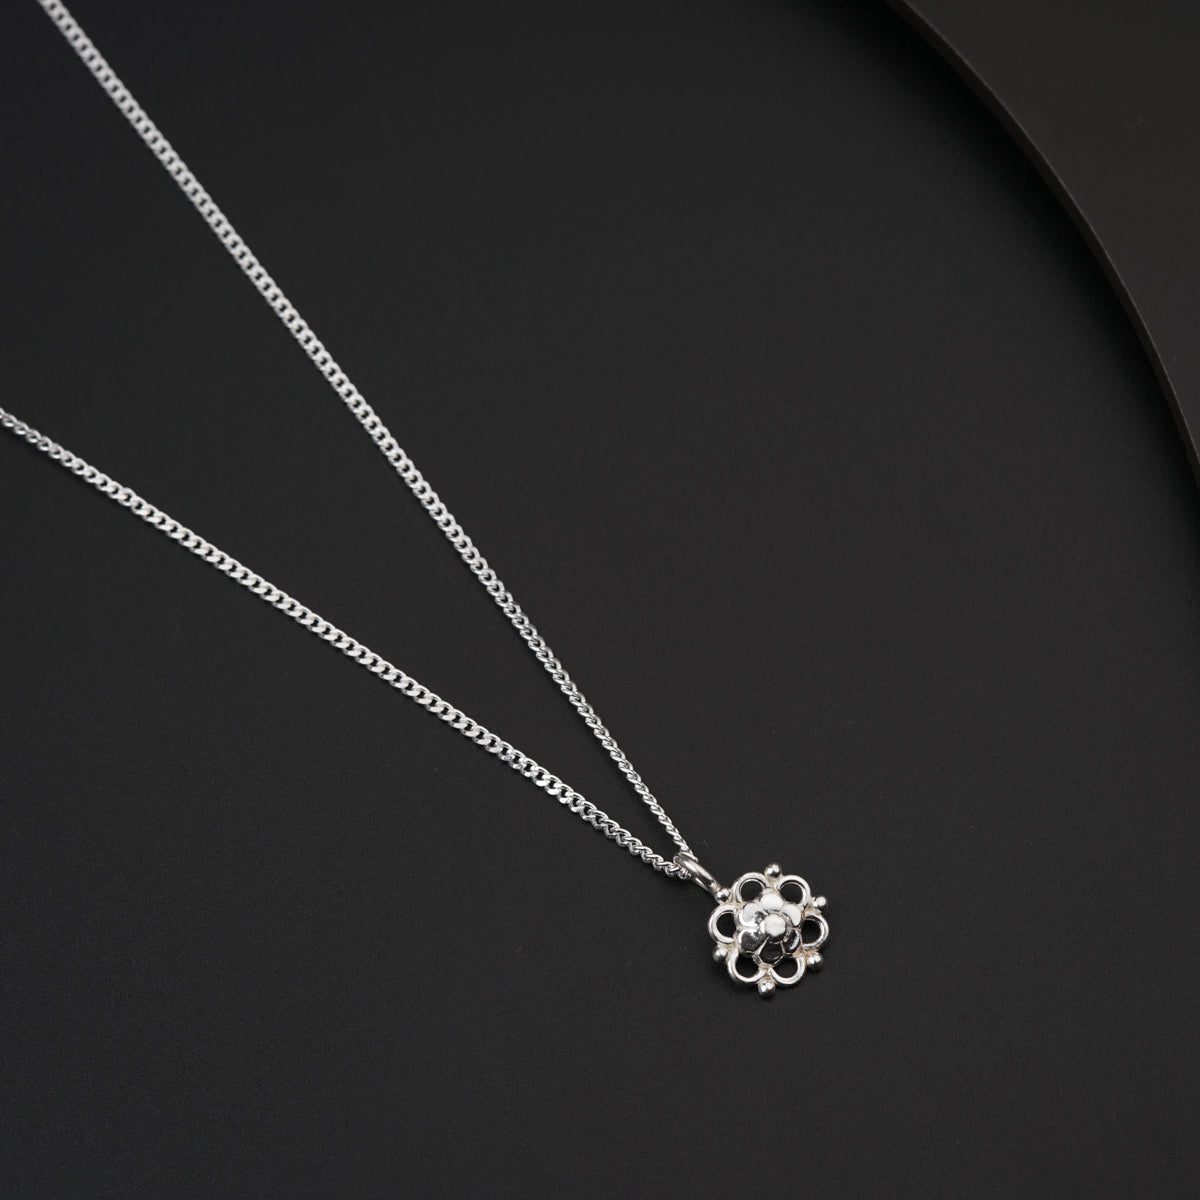 Daily Wear Silver Shiny Flower Necklace